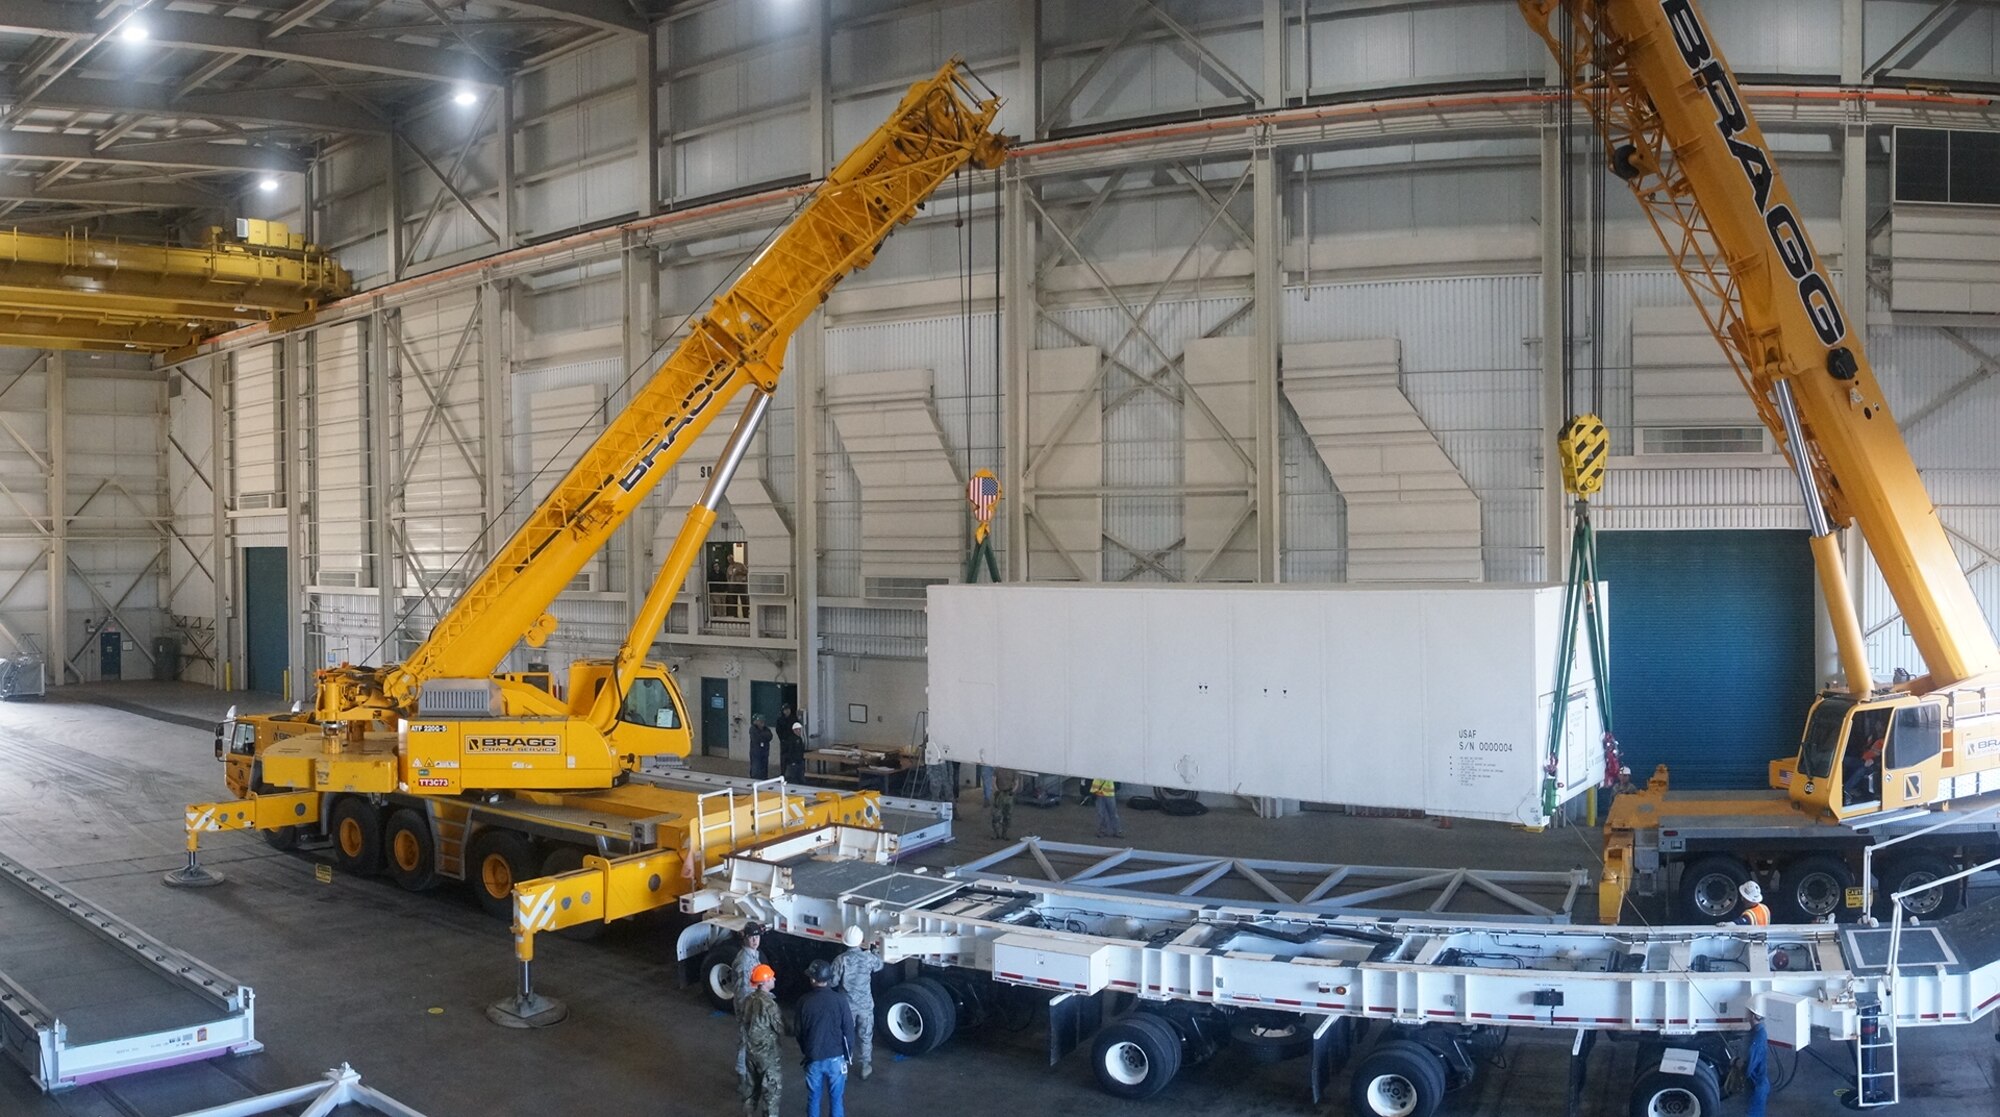 The 1st Air and Space Test Squadron successfully demonstrated the capability to offload solid rocket motors using mobile rental cranes 28 March, 2019, at Vandenberg Air Force Base, Calif.